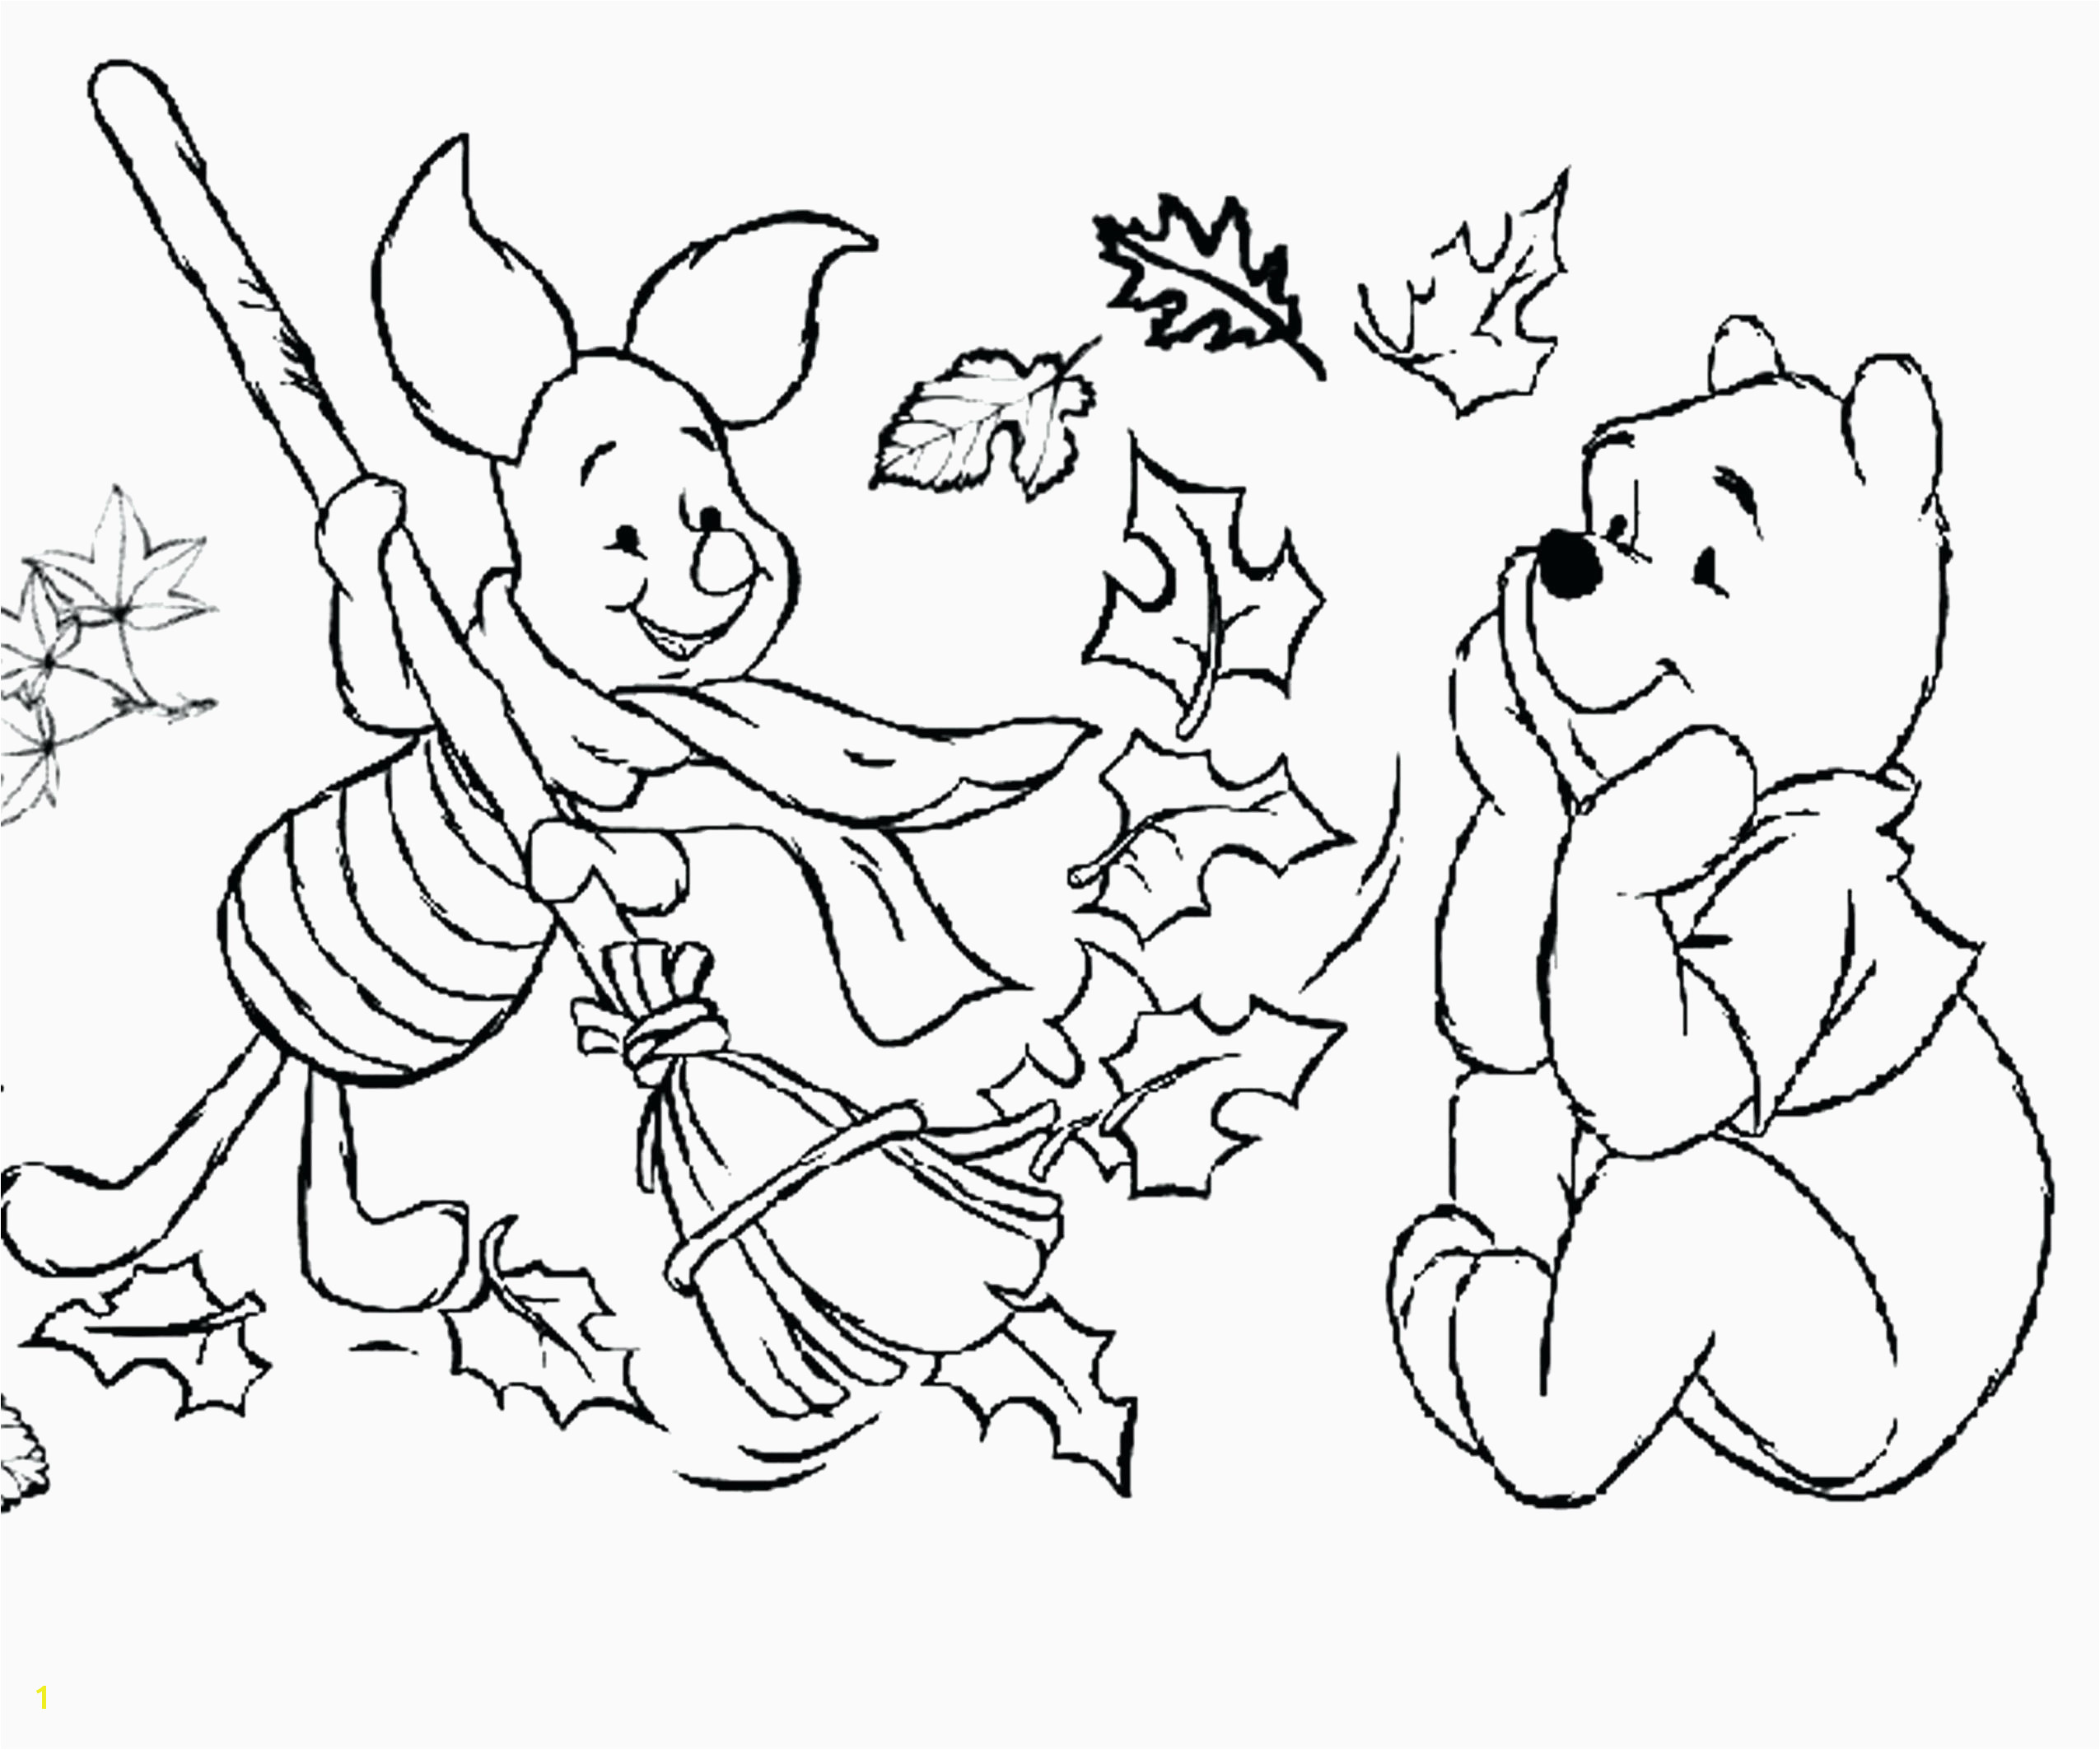 Coloring Pages Of Haunted Houses Coloring Pages Free Printable Coloring Pages for Children that You